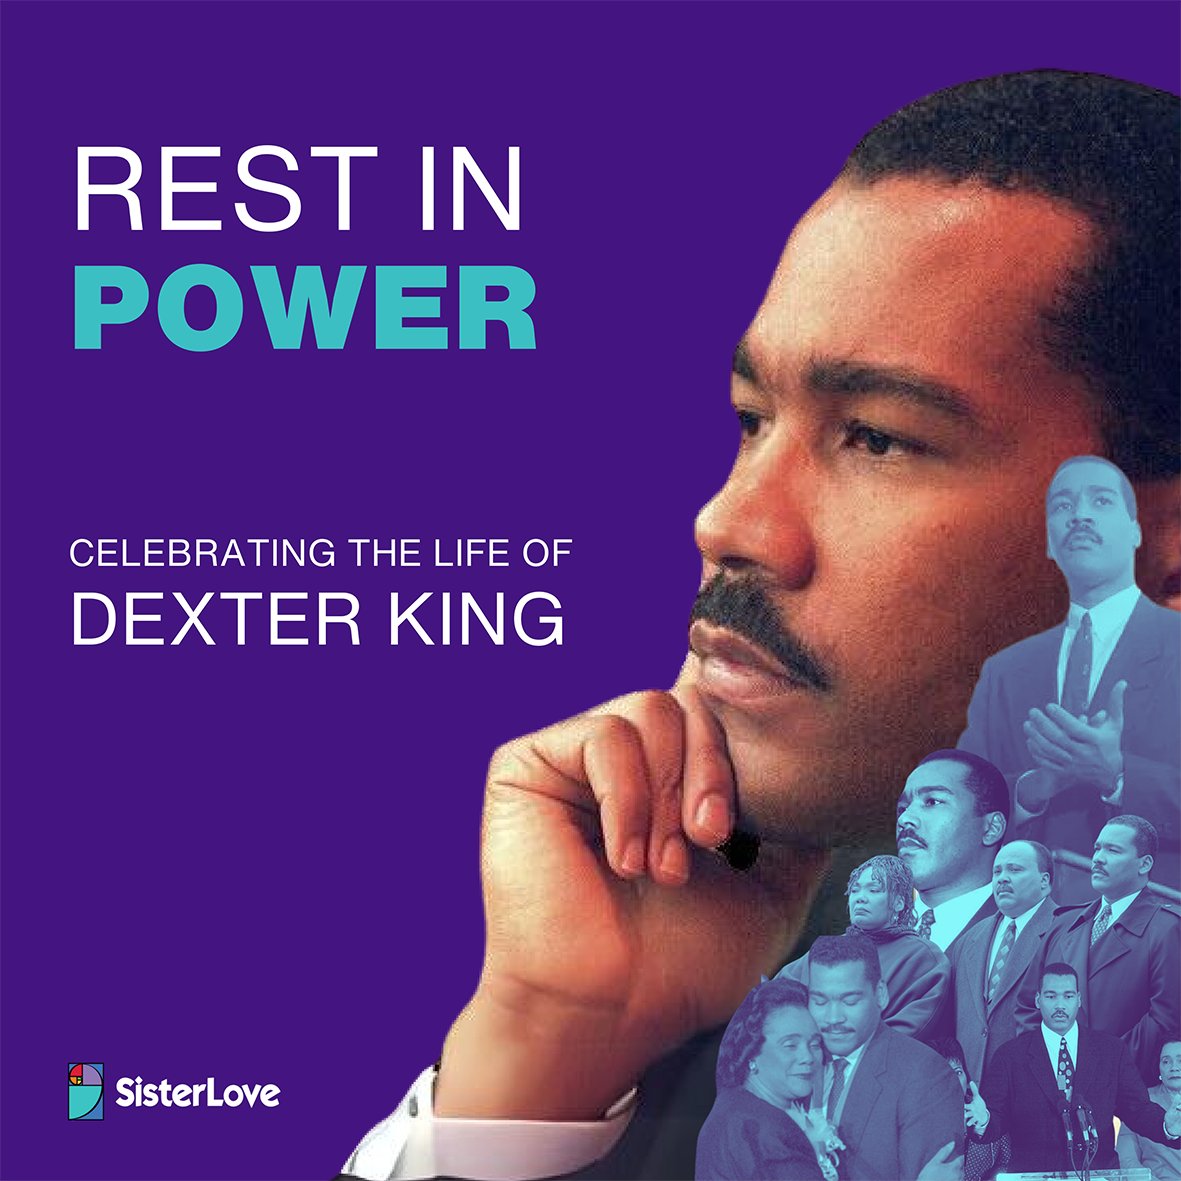 Still reeling from the loss of Dexter King. His dedication to justice and equality inspires us to continue fighting for reproductive justice for all. #SisterLoveInc #ReproductiveJustice #CivilRights #DexterKing